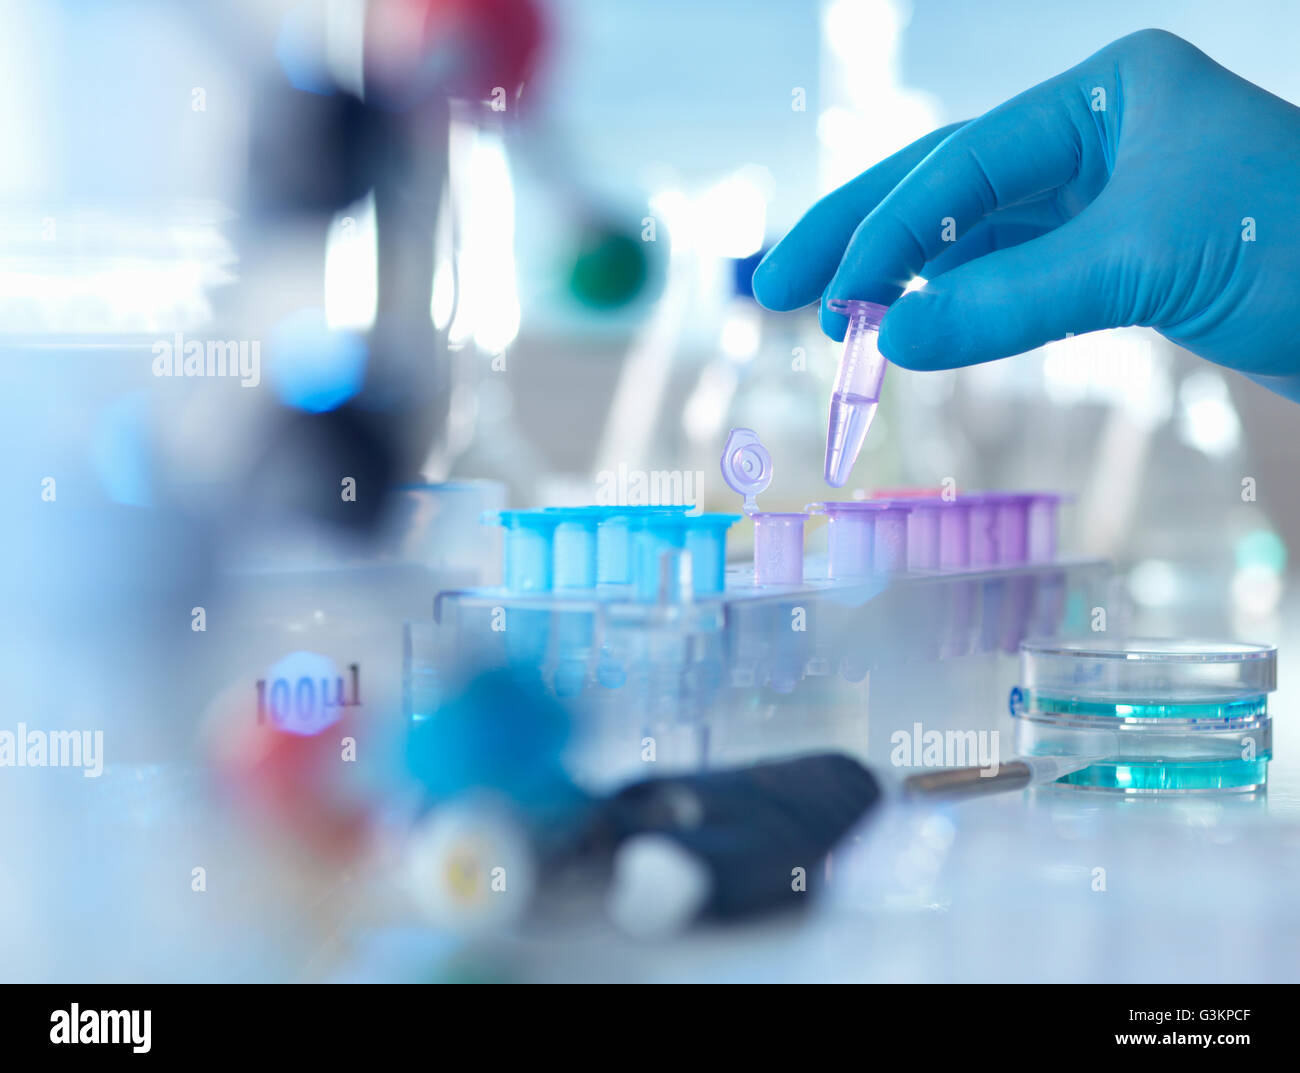 A eppendorf containing a sample used in analytical chemistry and DNA extraction awaiting testing in a laboratory Stock Photo